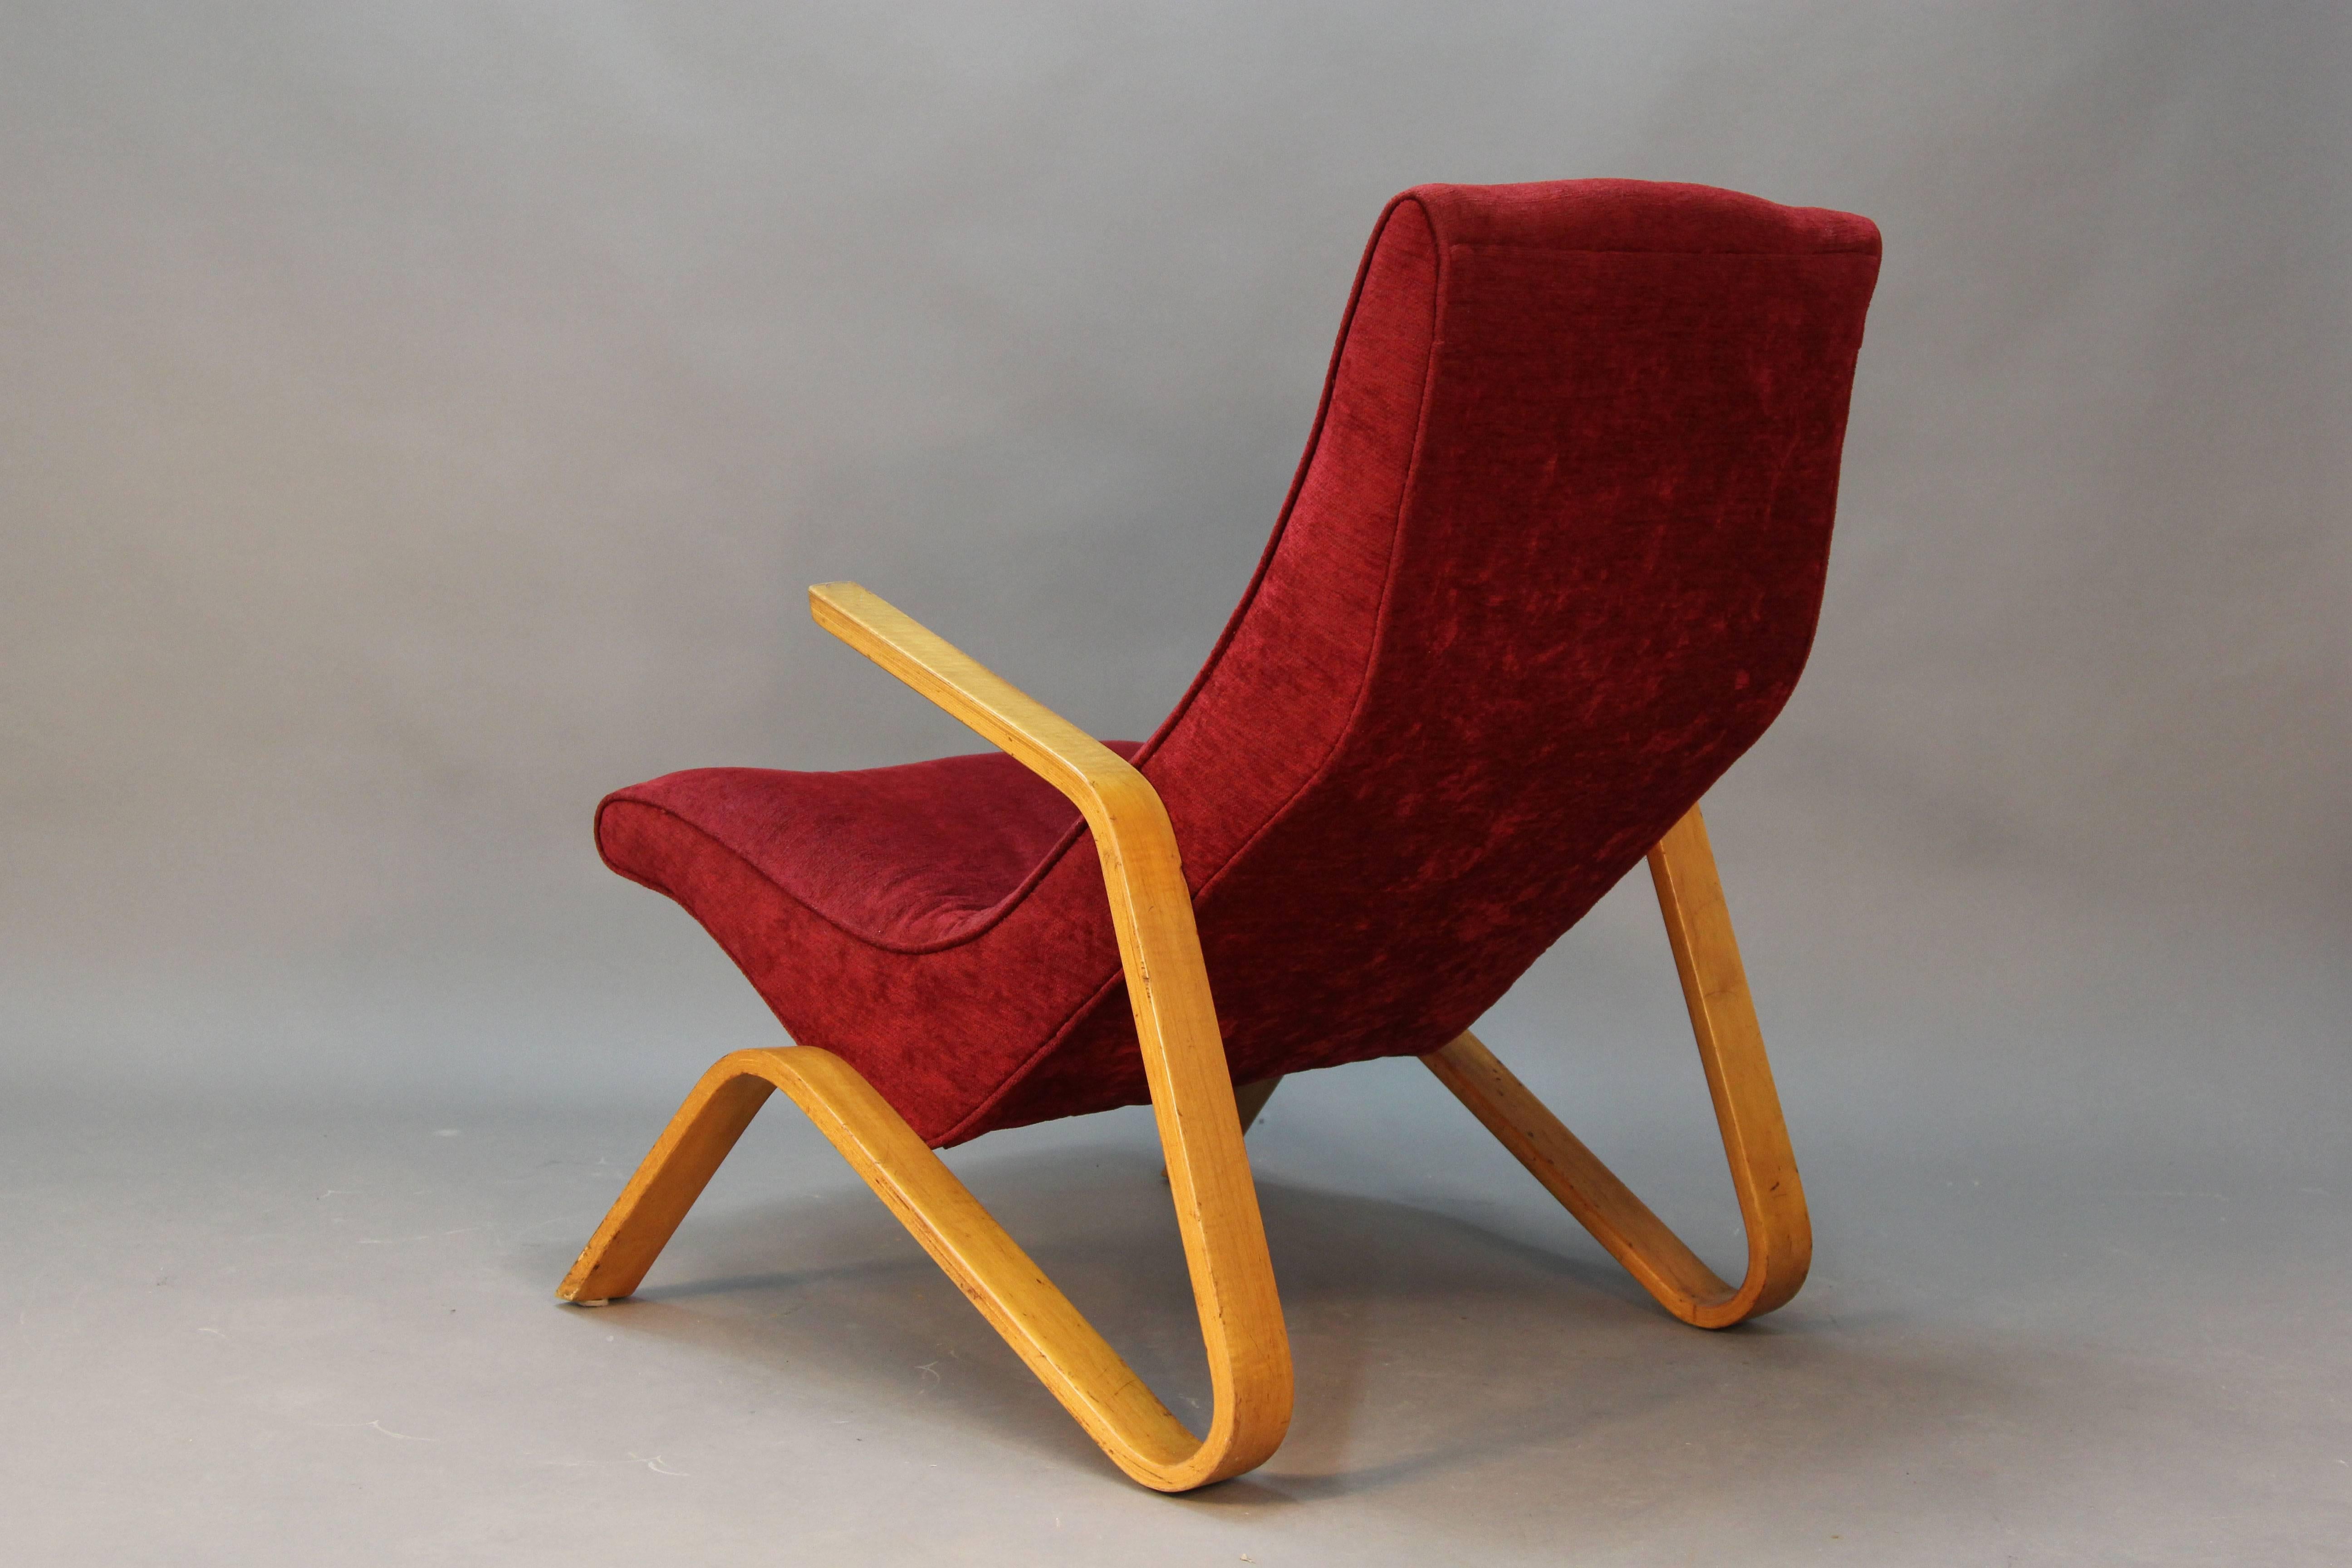 Designed for Knoll in 1946. The grasshopper is the first chair Saarinen designed in a series of sculptural chairs created for Knoll throughout the 1940s and 1950s. Knoll manufactured the chair and ottoman for 19 years and ended its production in